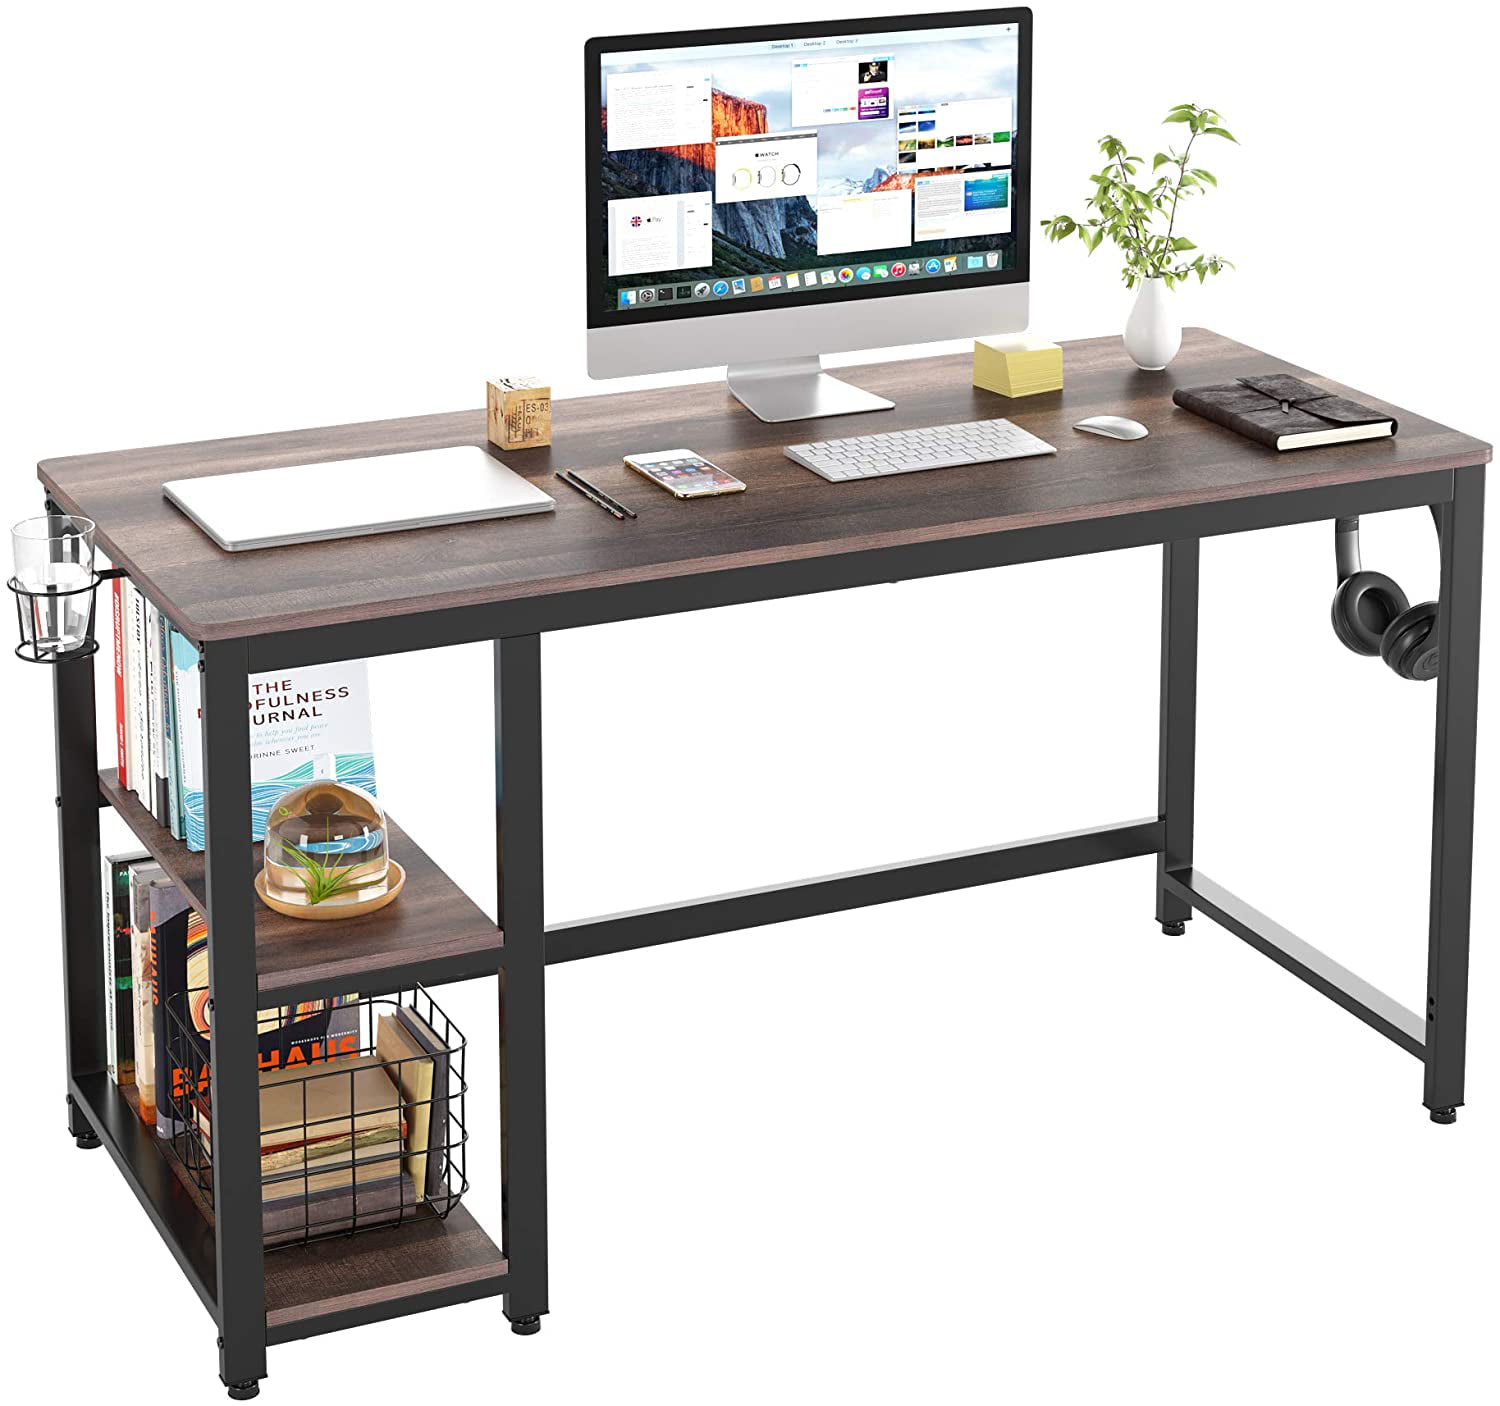 IRONCK Computer Desk 55 Industrial Writing Desk Office Desk Gaming Desk with Sturdy Metal Frame Espresso Simple Study Table Workstation for Home Office